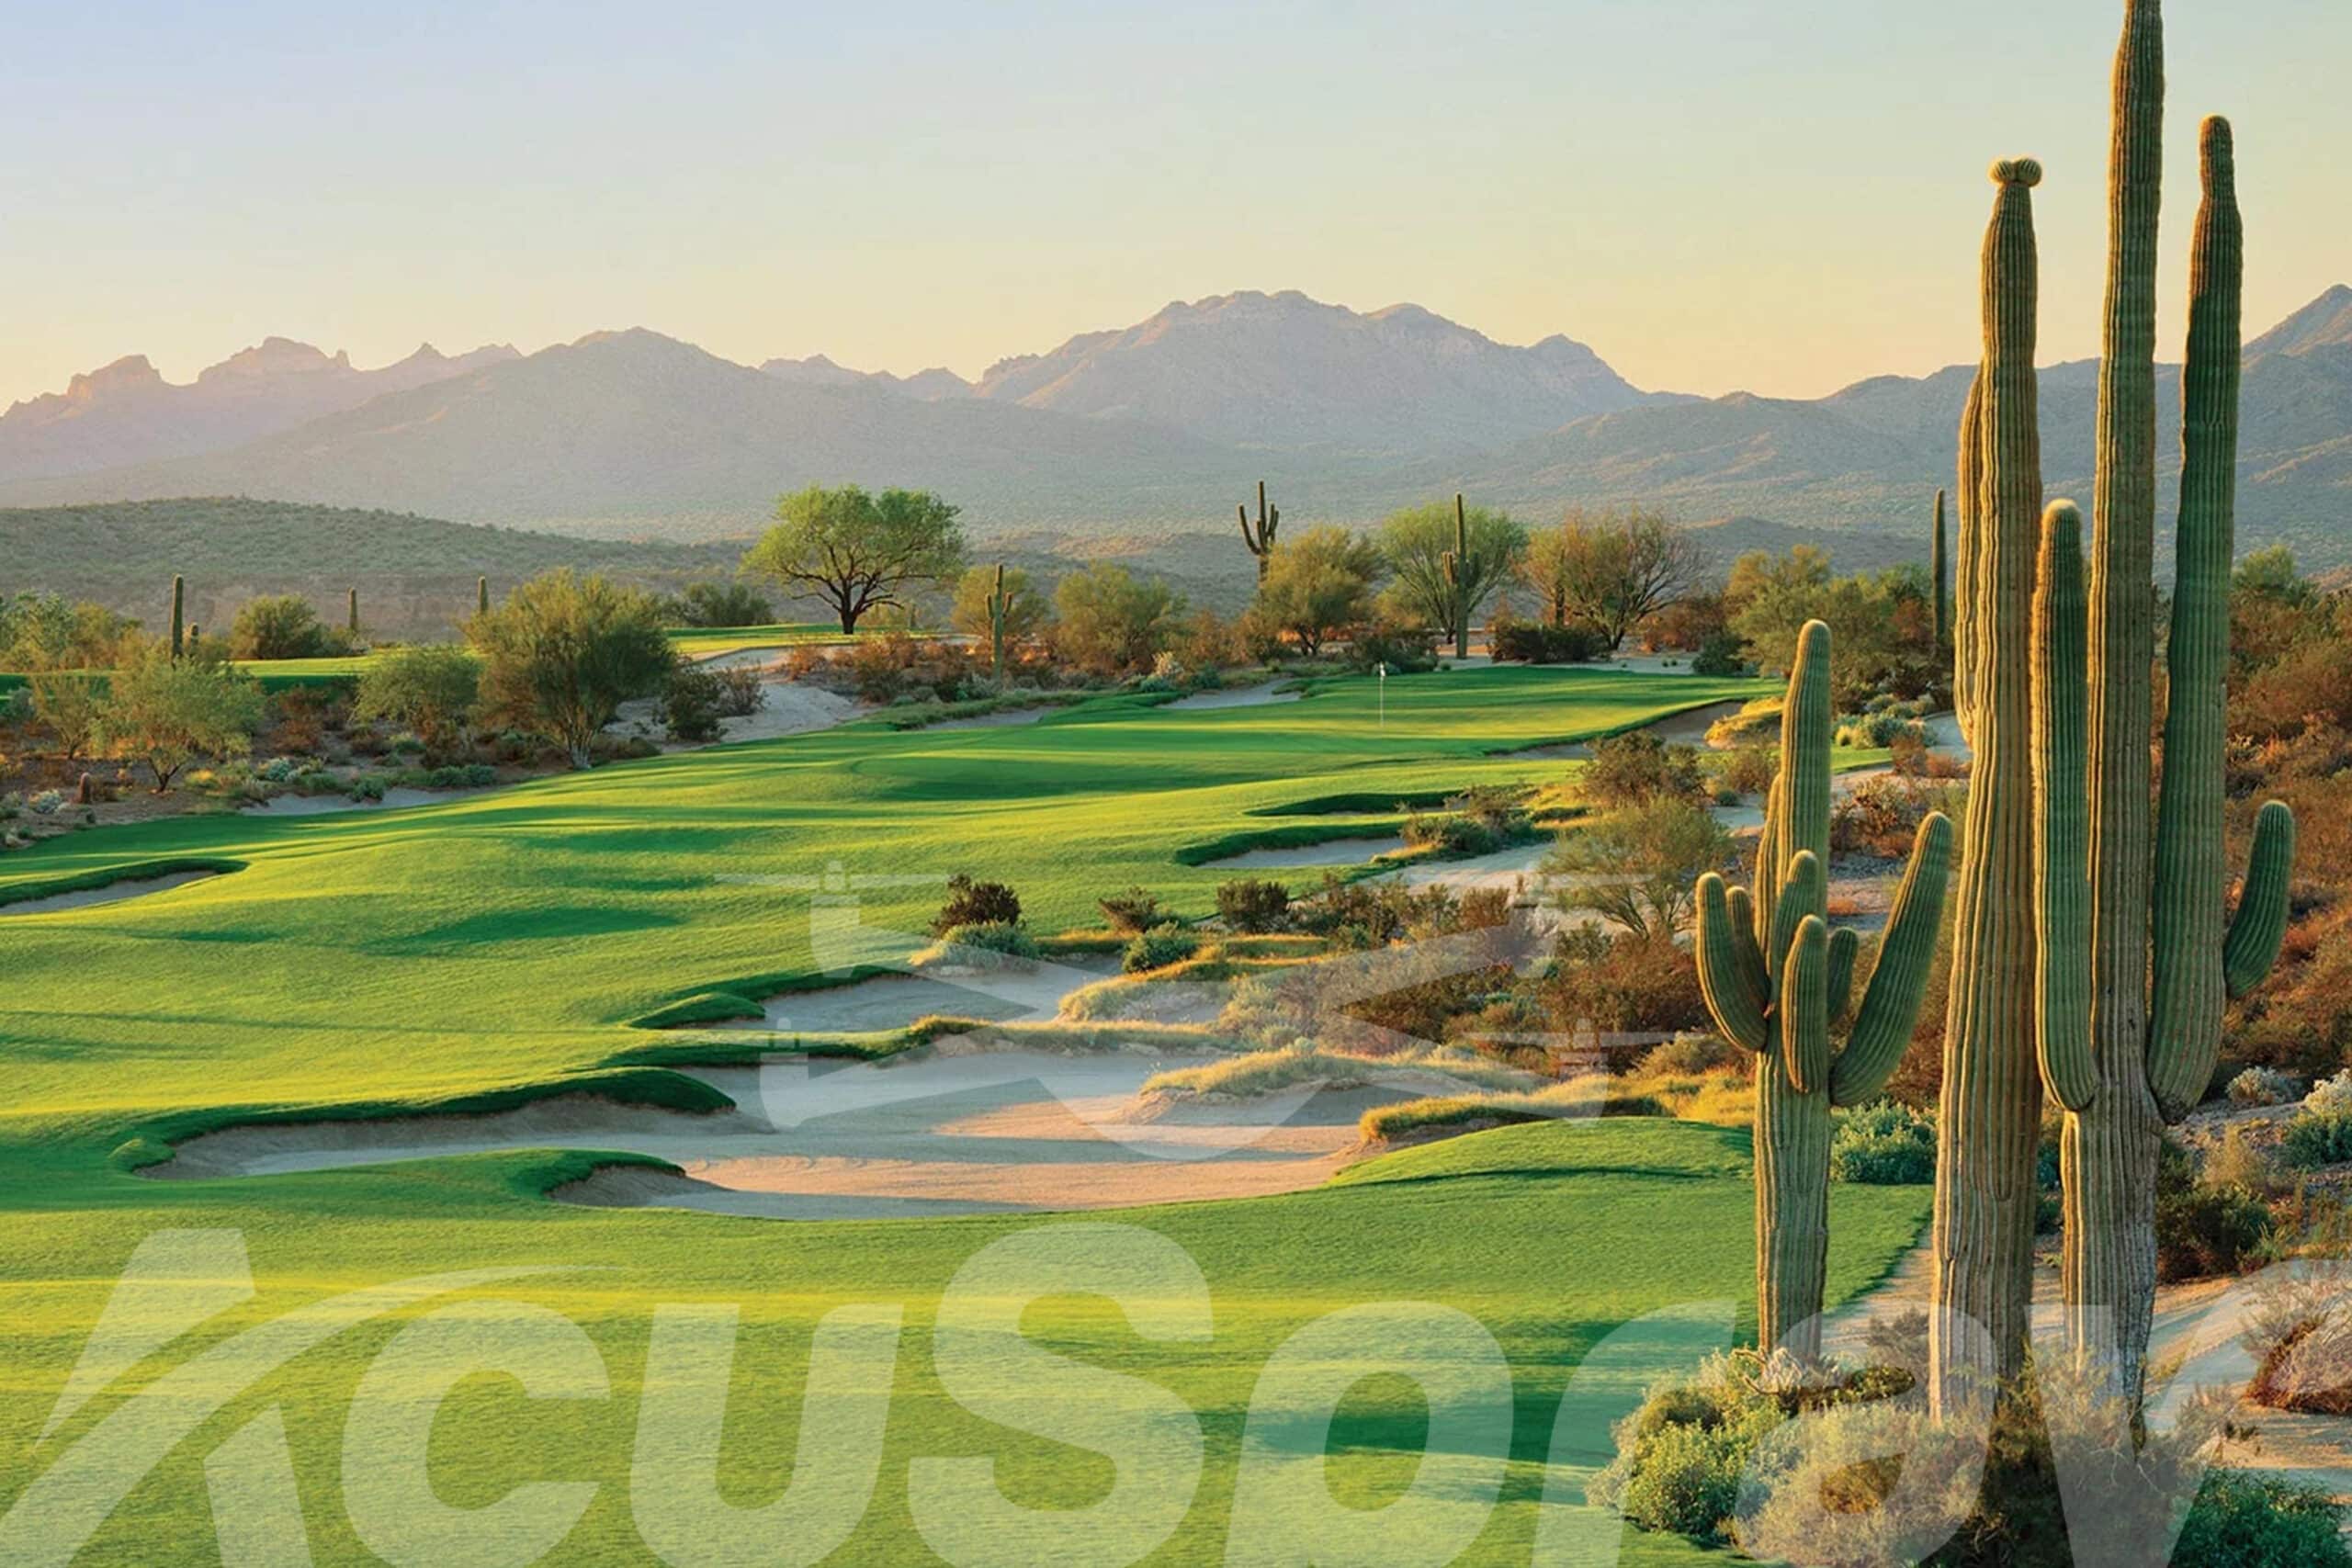 Golf course in Southwest with cacti foreground and distant mountains, showcasing Southwest turf management.